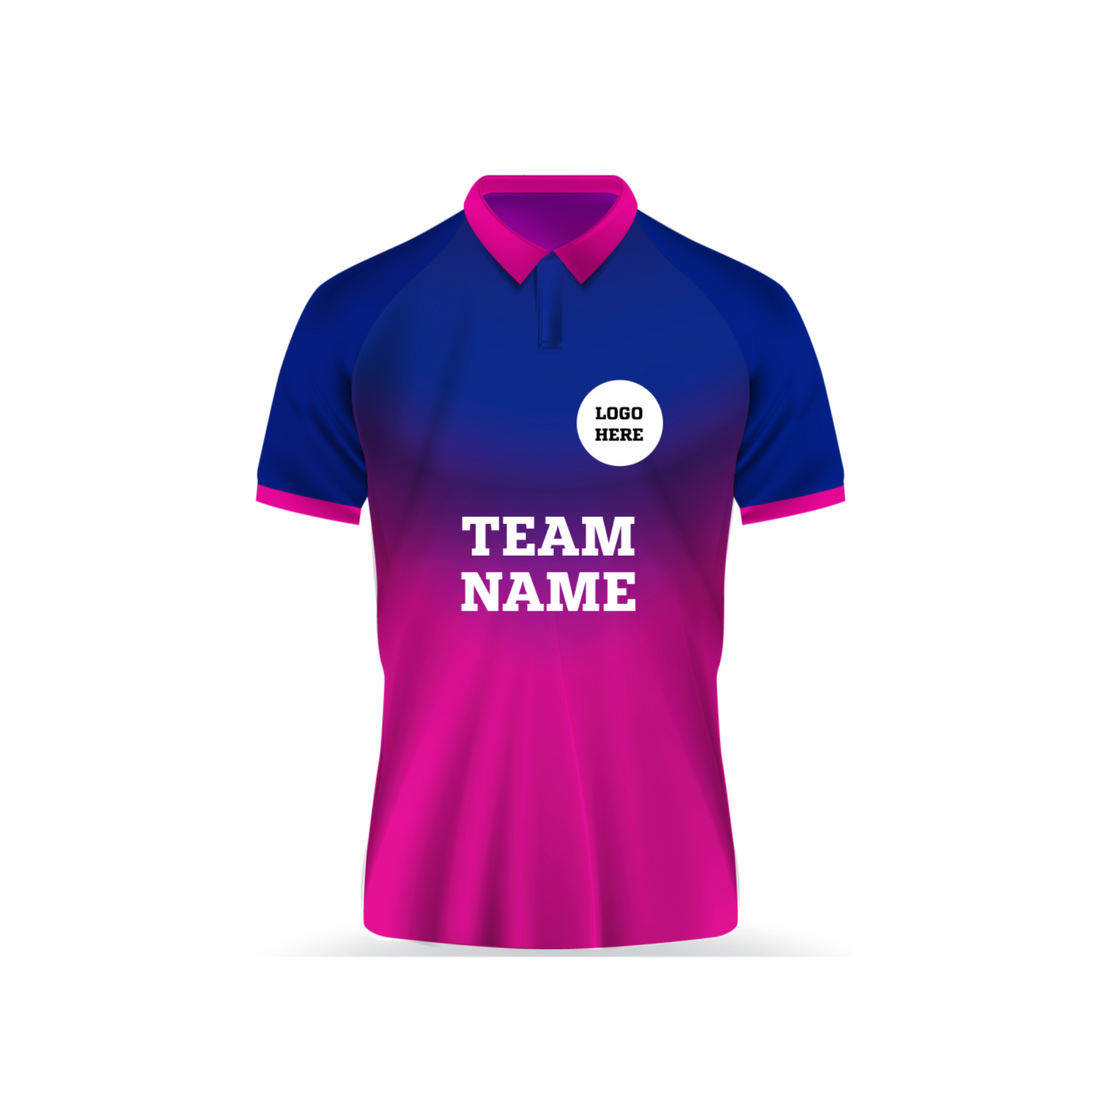 All Over Printed Customized Sublimation T-Shirt Unisex Cricket Sports Jersey Player Name & Number, Team Name and Logo.1880335339